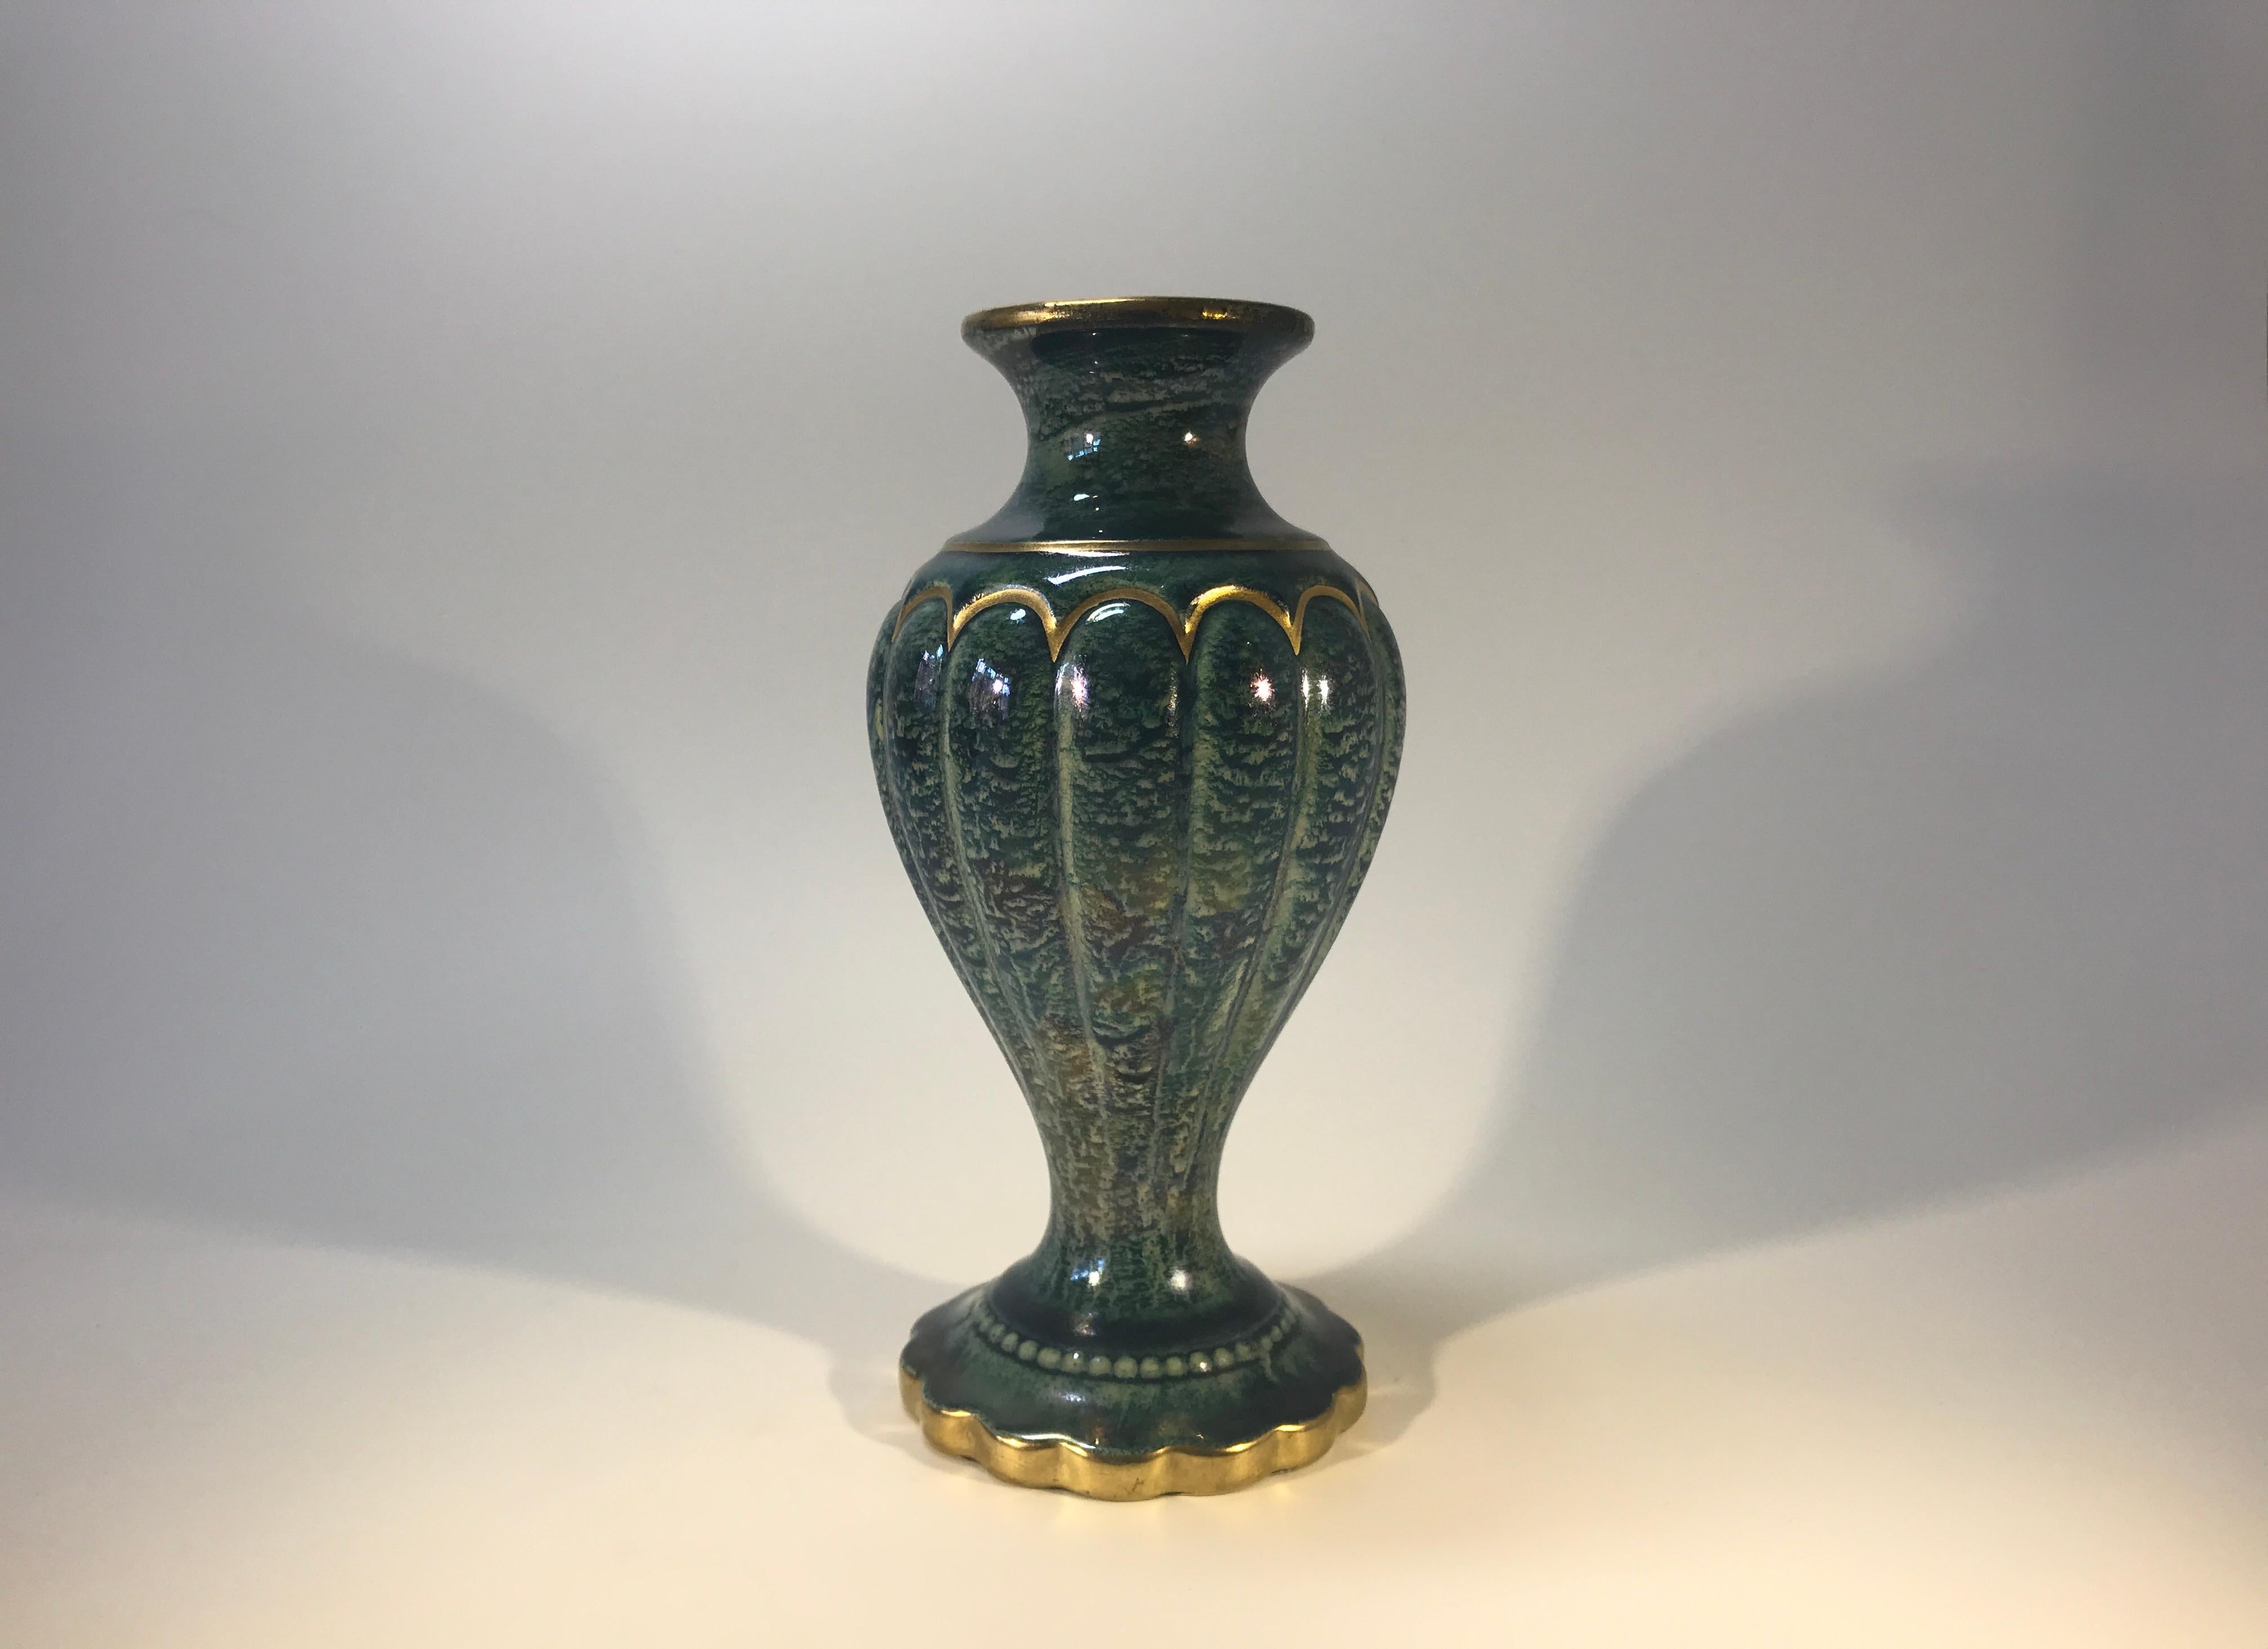 Art Deco baluster vase by Josef Ekberg for Gustavsberg. Green-blue ethereal lustre glaze with hand decorated gilt decoration.
Signed and dated 1929 with Anchor mark
A beautiful example of Ekberg's craftsmanship
In very good condition with minor